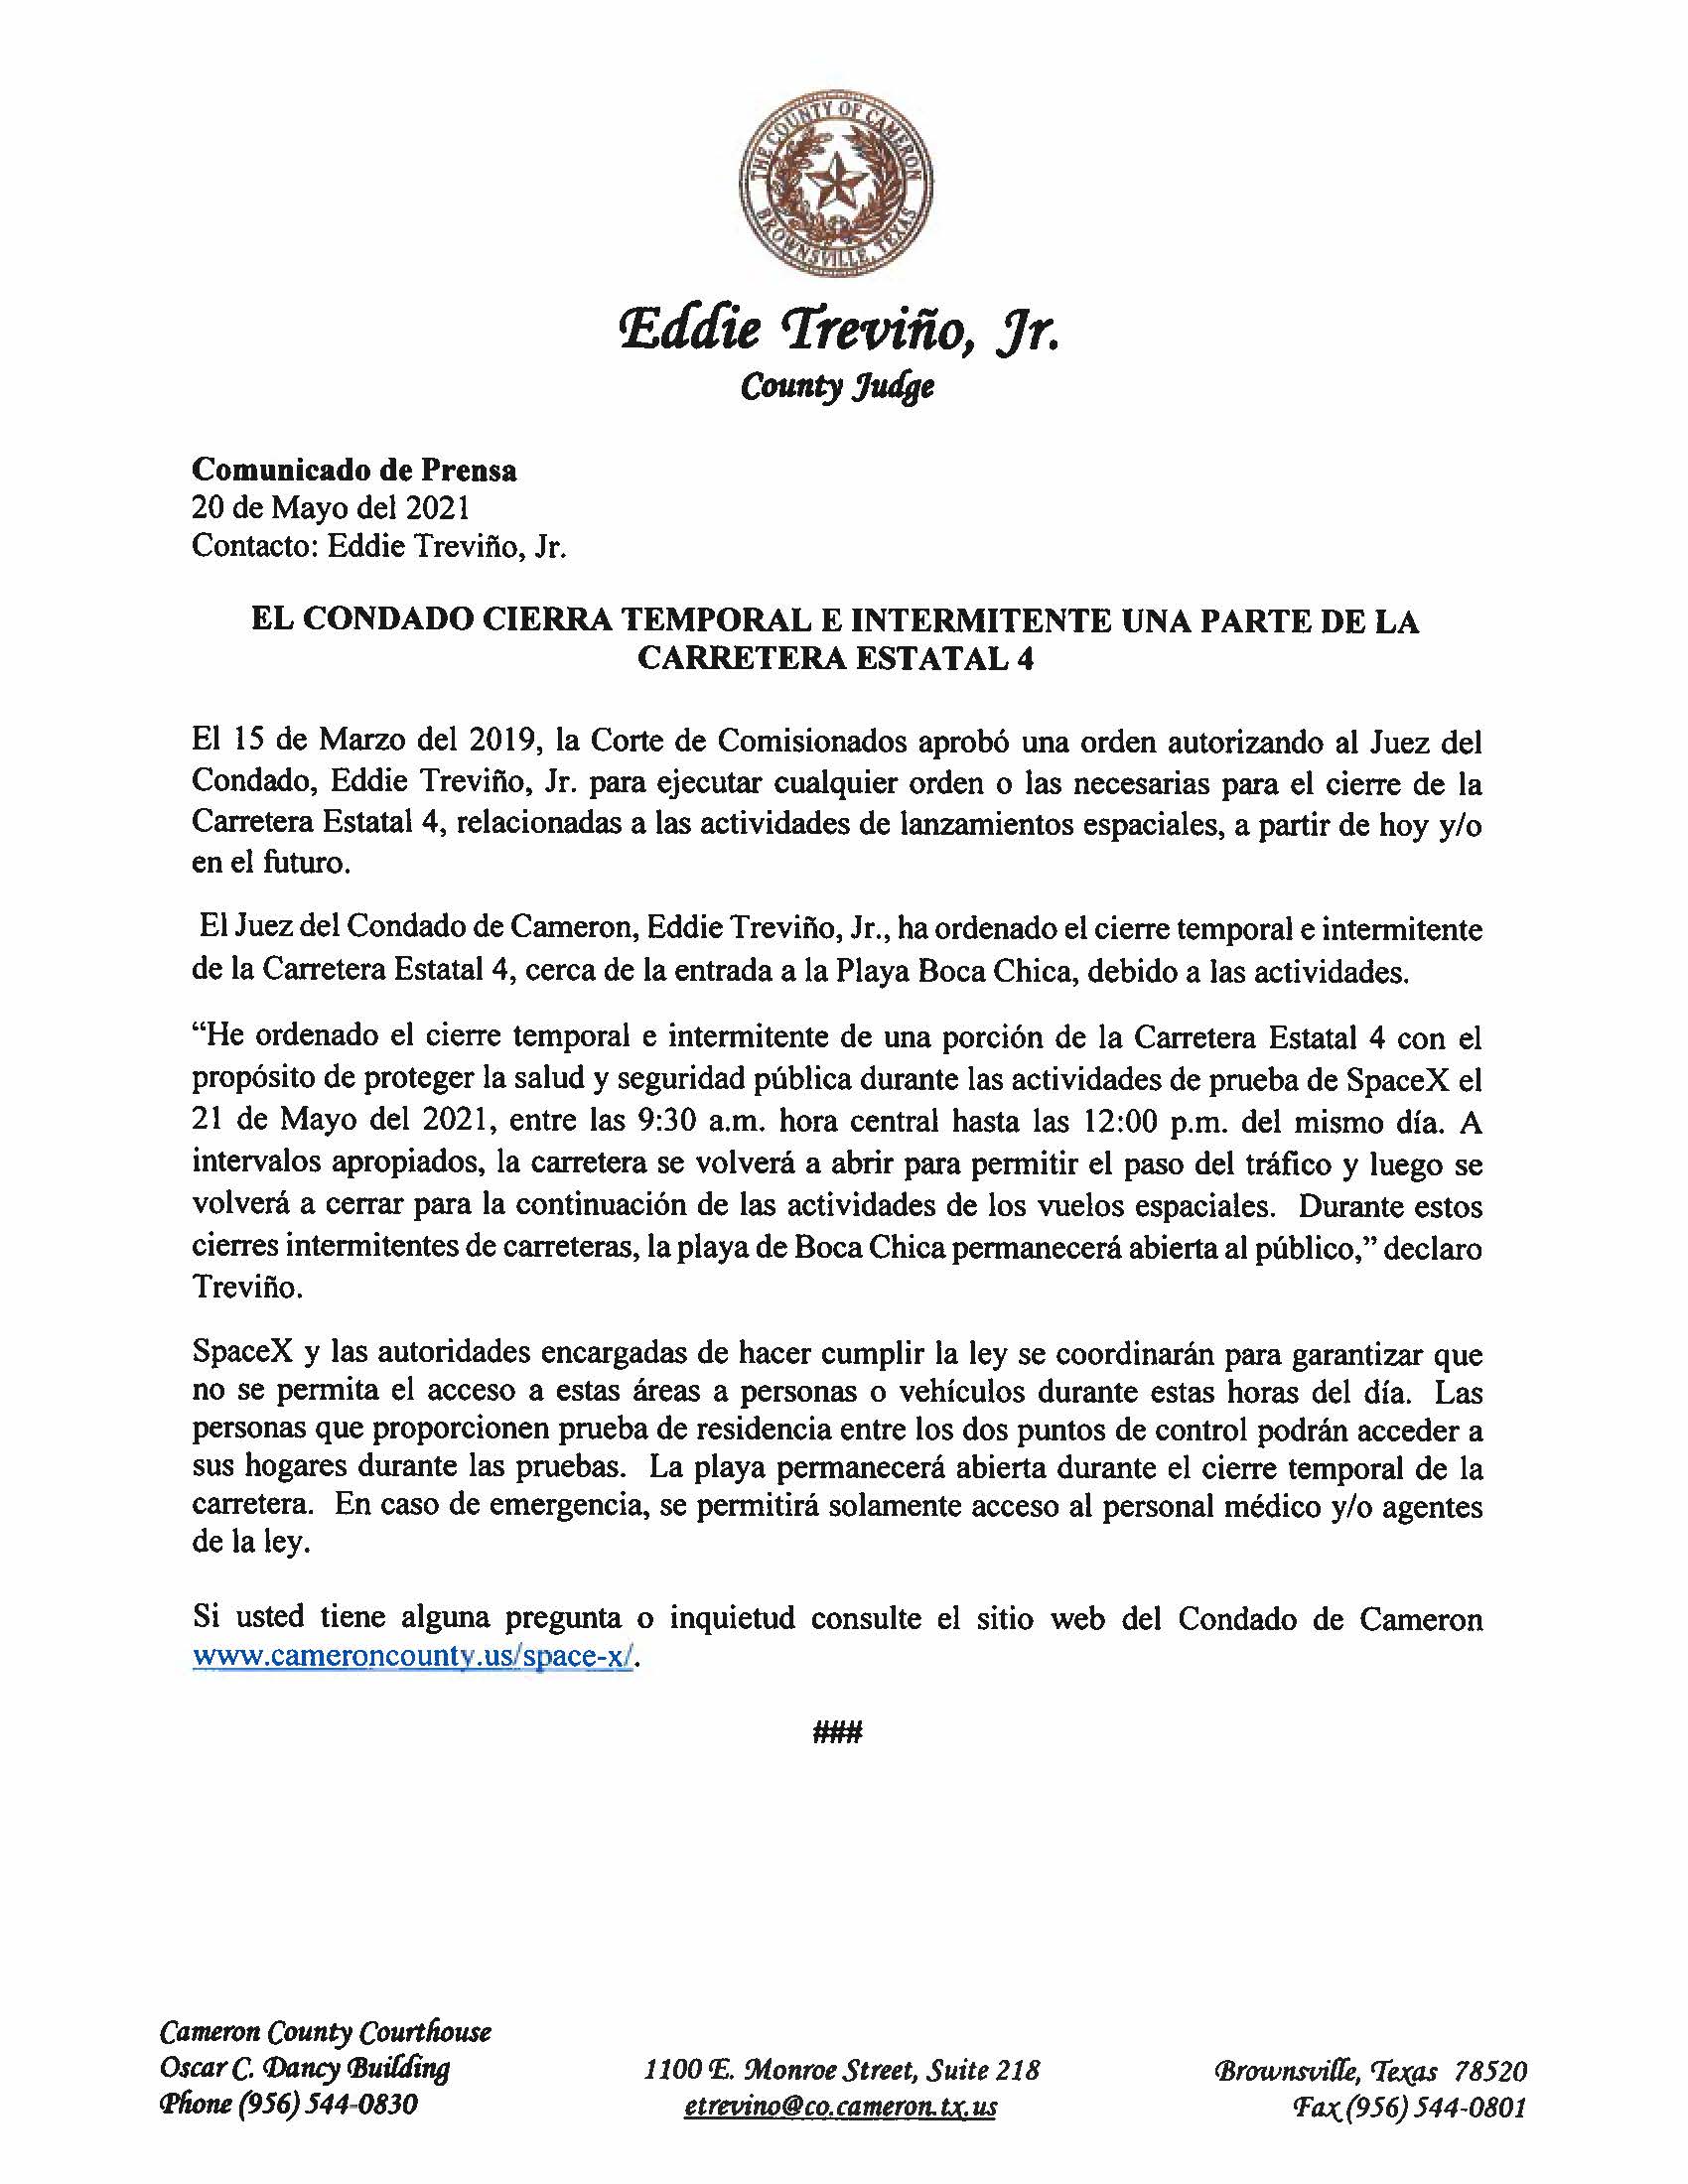 Press Release In English And Spanish.05.21.2021 Page 2